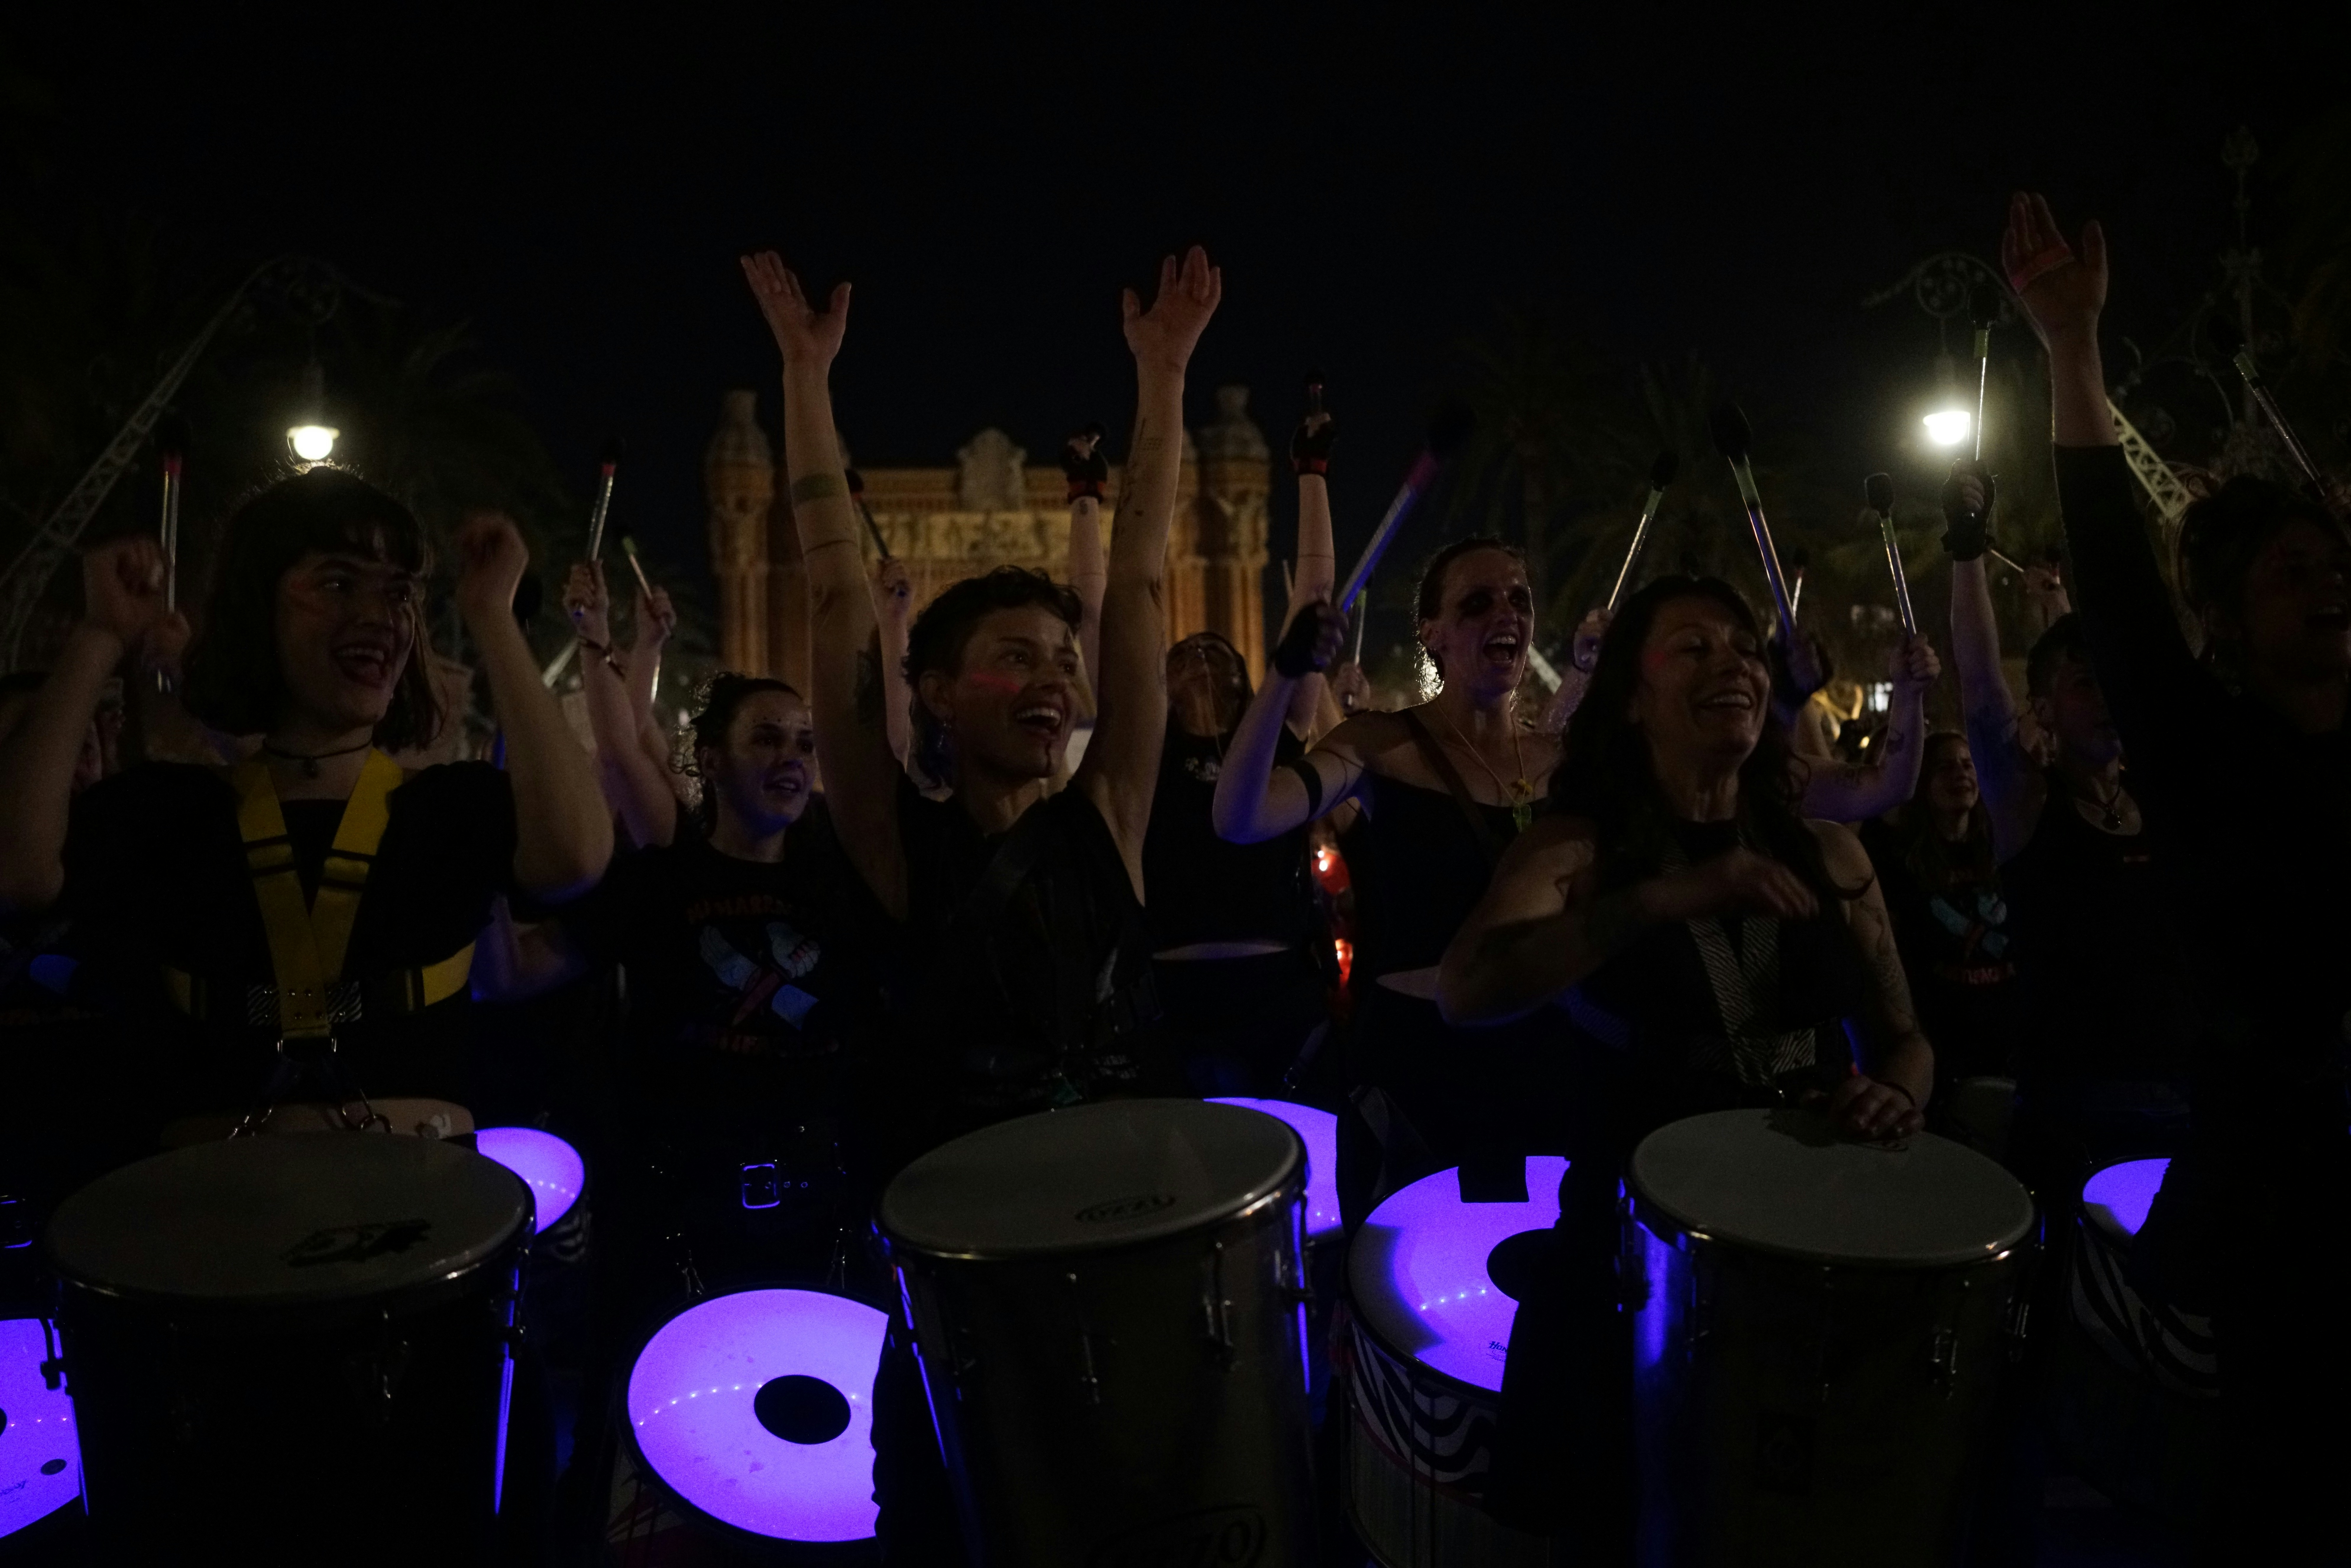 8.03.2023, Barcelona, Spain. The procession of women through the streets of Barcelona in a demonstration for their rights. An orchestra of female drummers walks through the streets and plays music